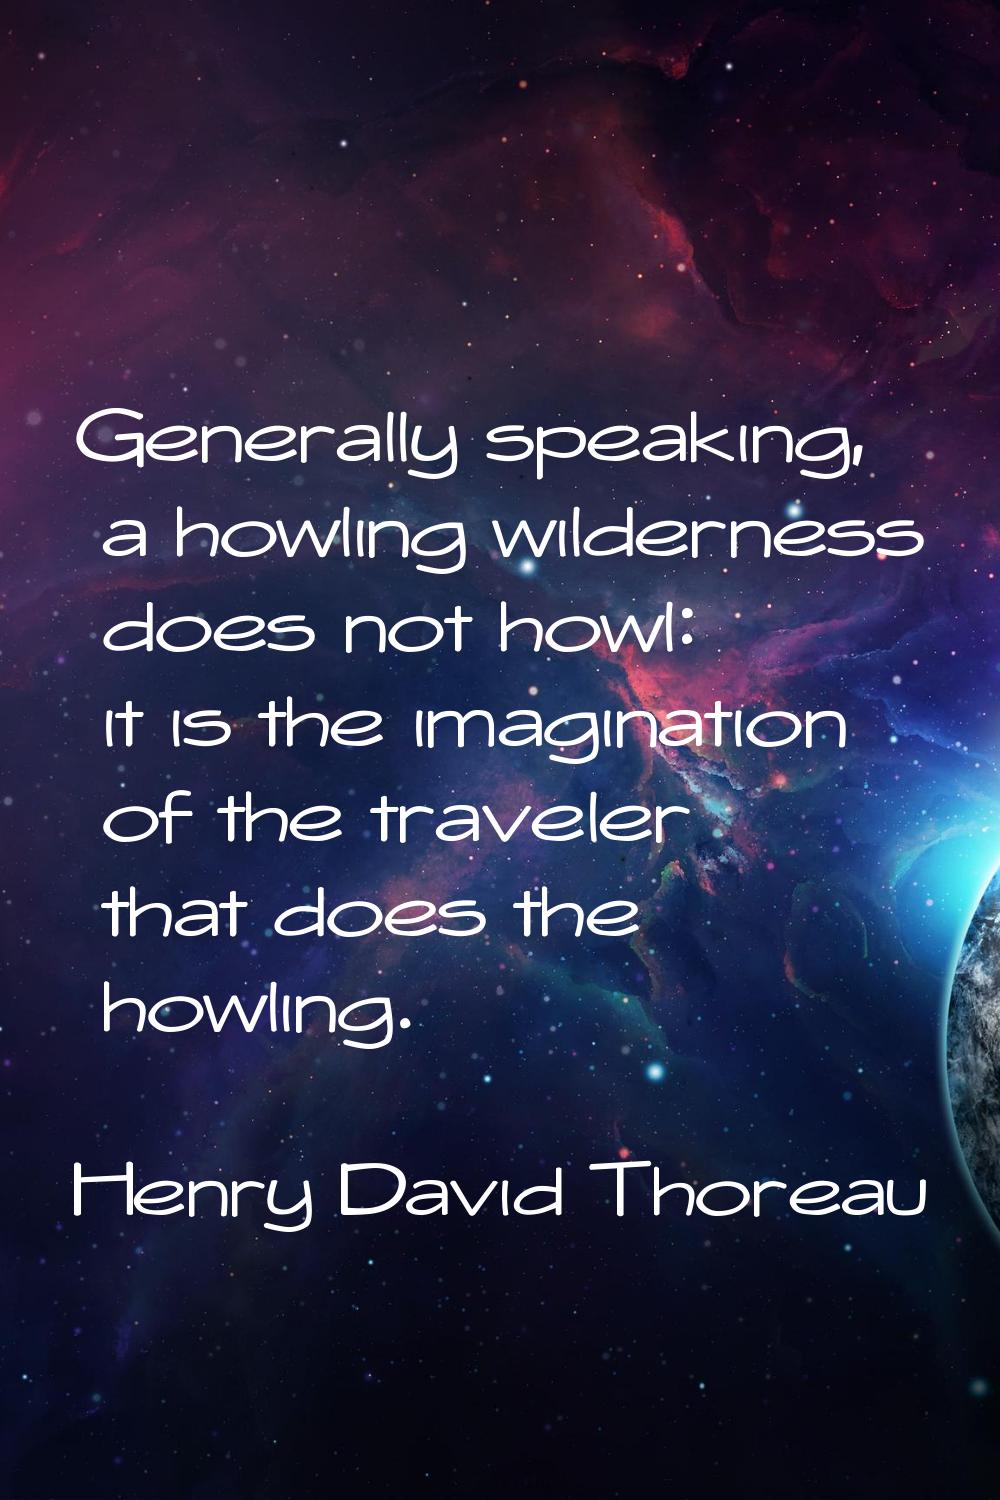 Generally speaking, a howling wilderness does not howl: it is the imagination of the traveler that 